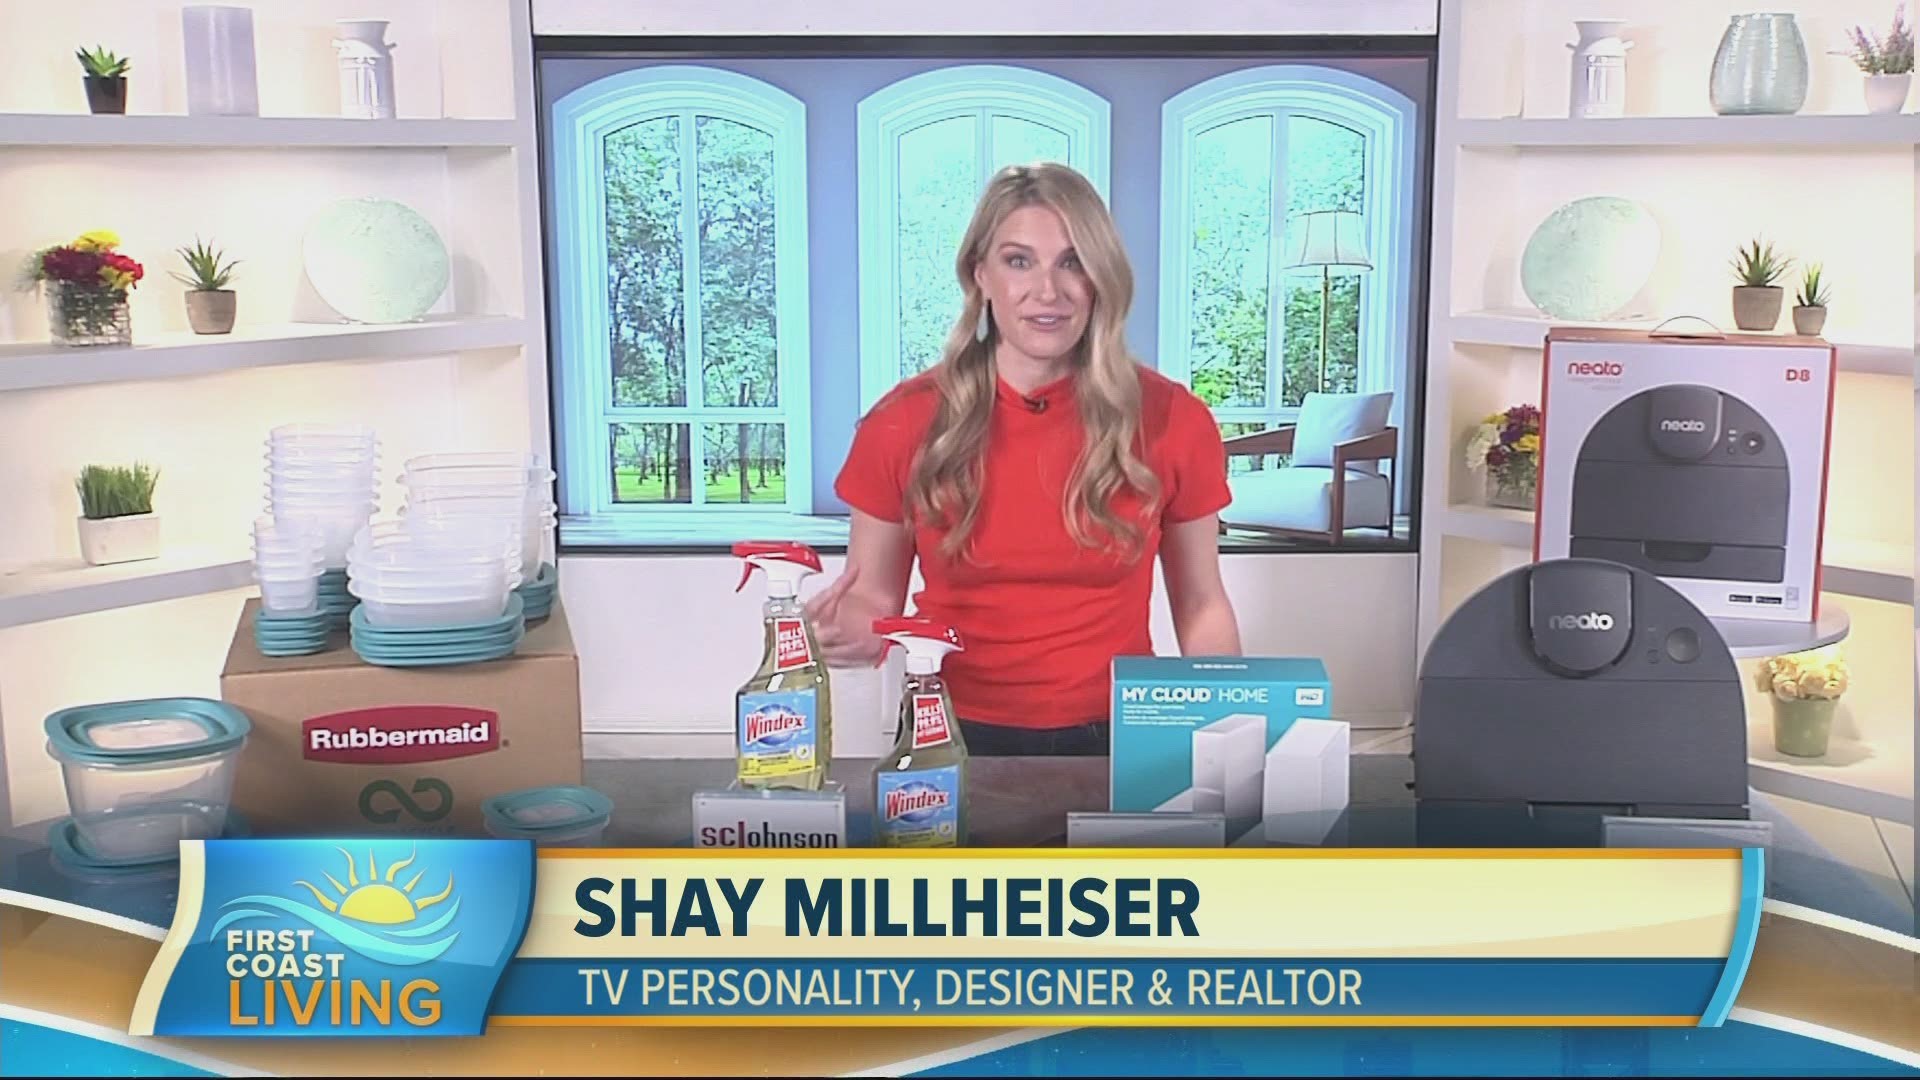 Learn what products will help clean and declutter your home!